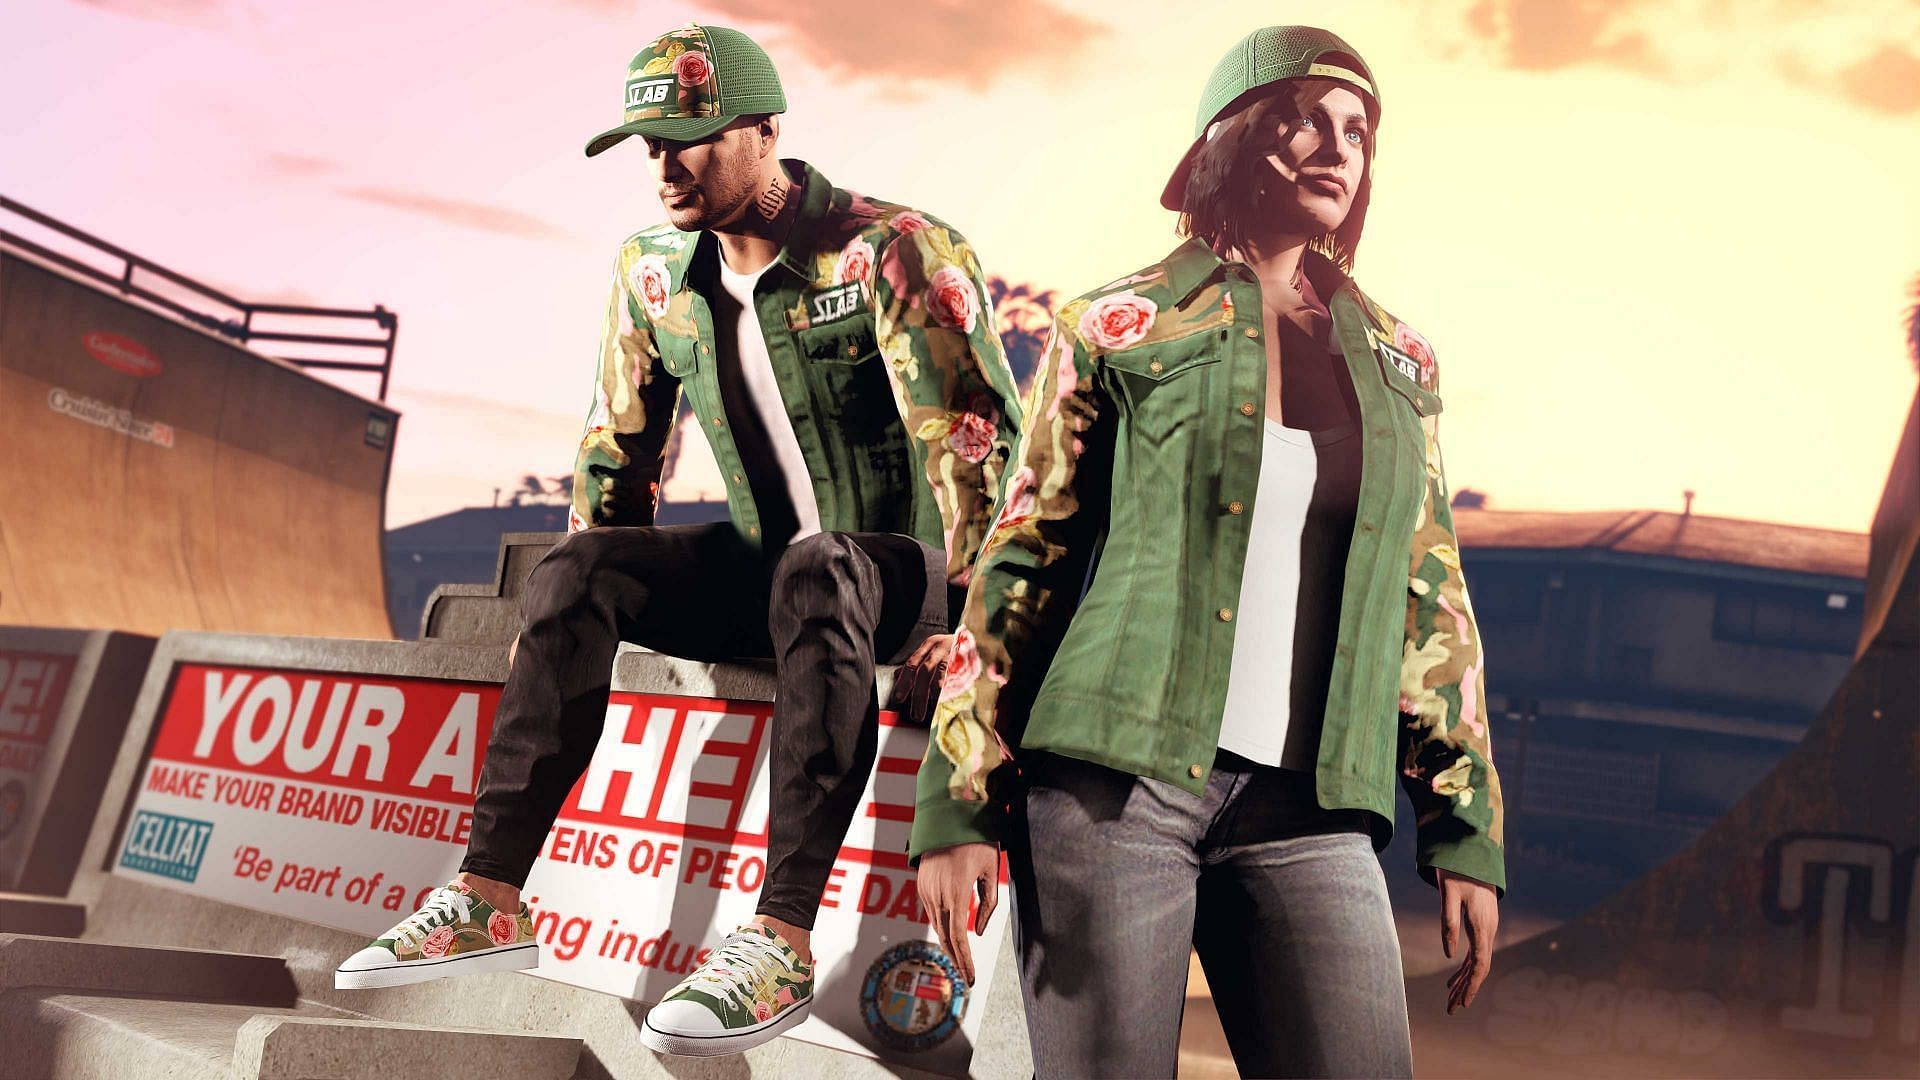 Rewards can be won by simply selling to Street Dealers (Image via Rockstar Games)